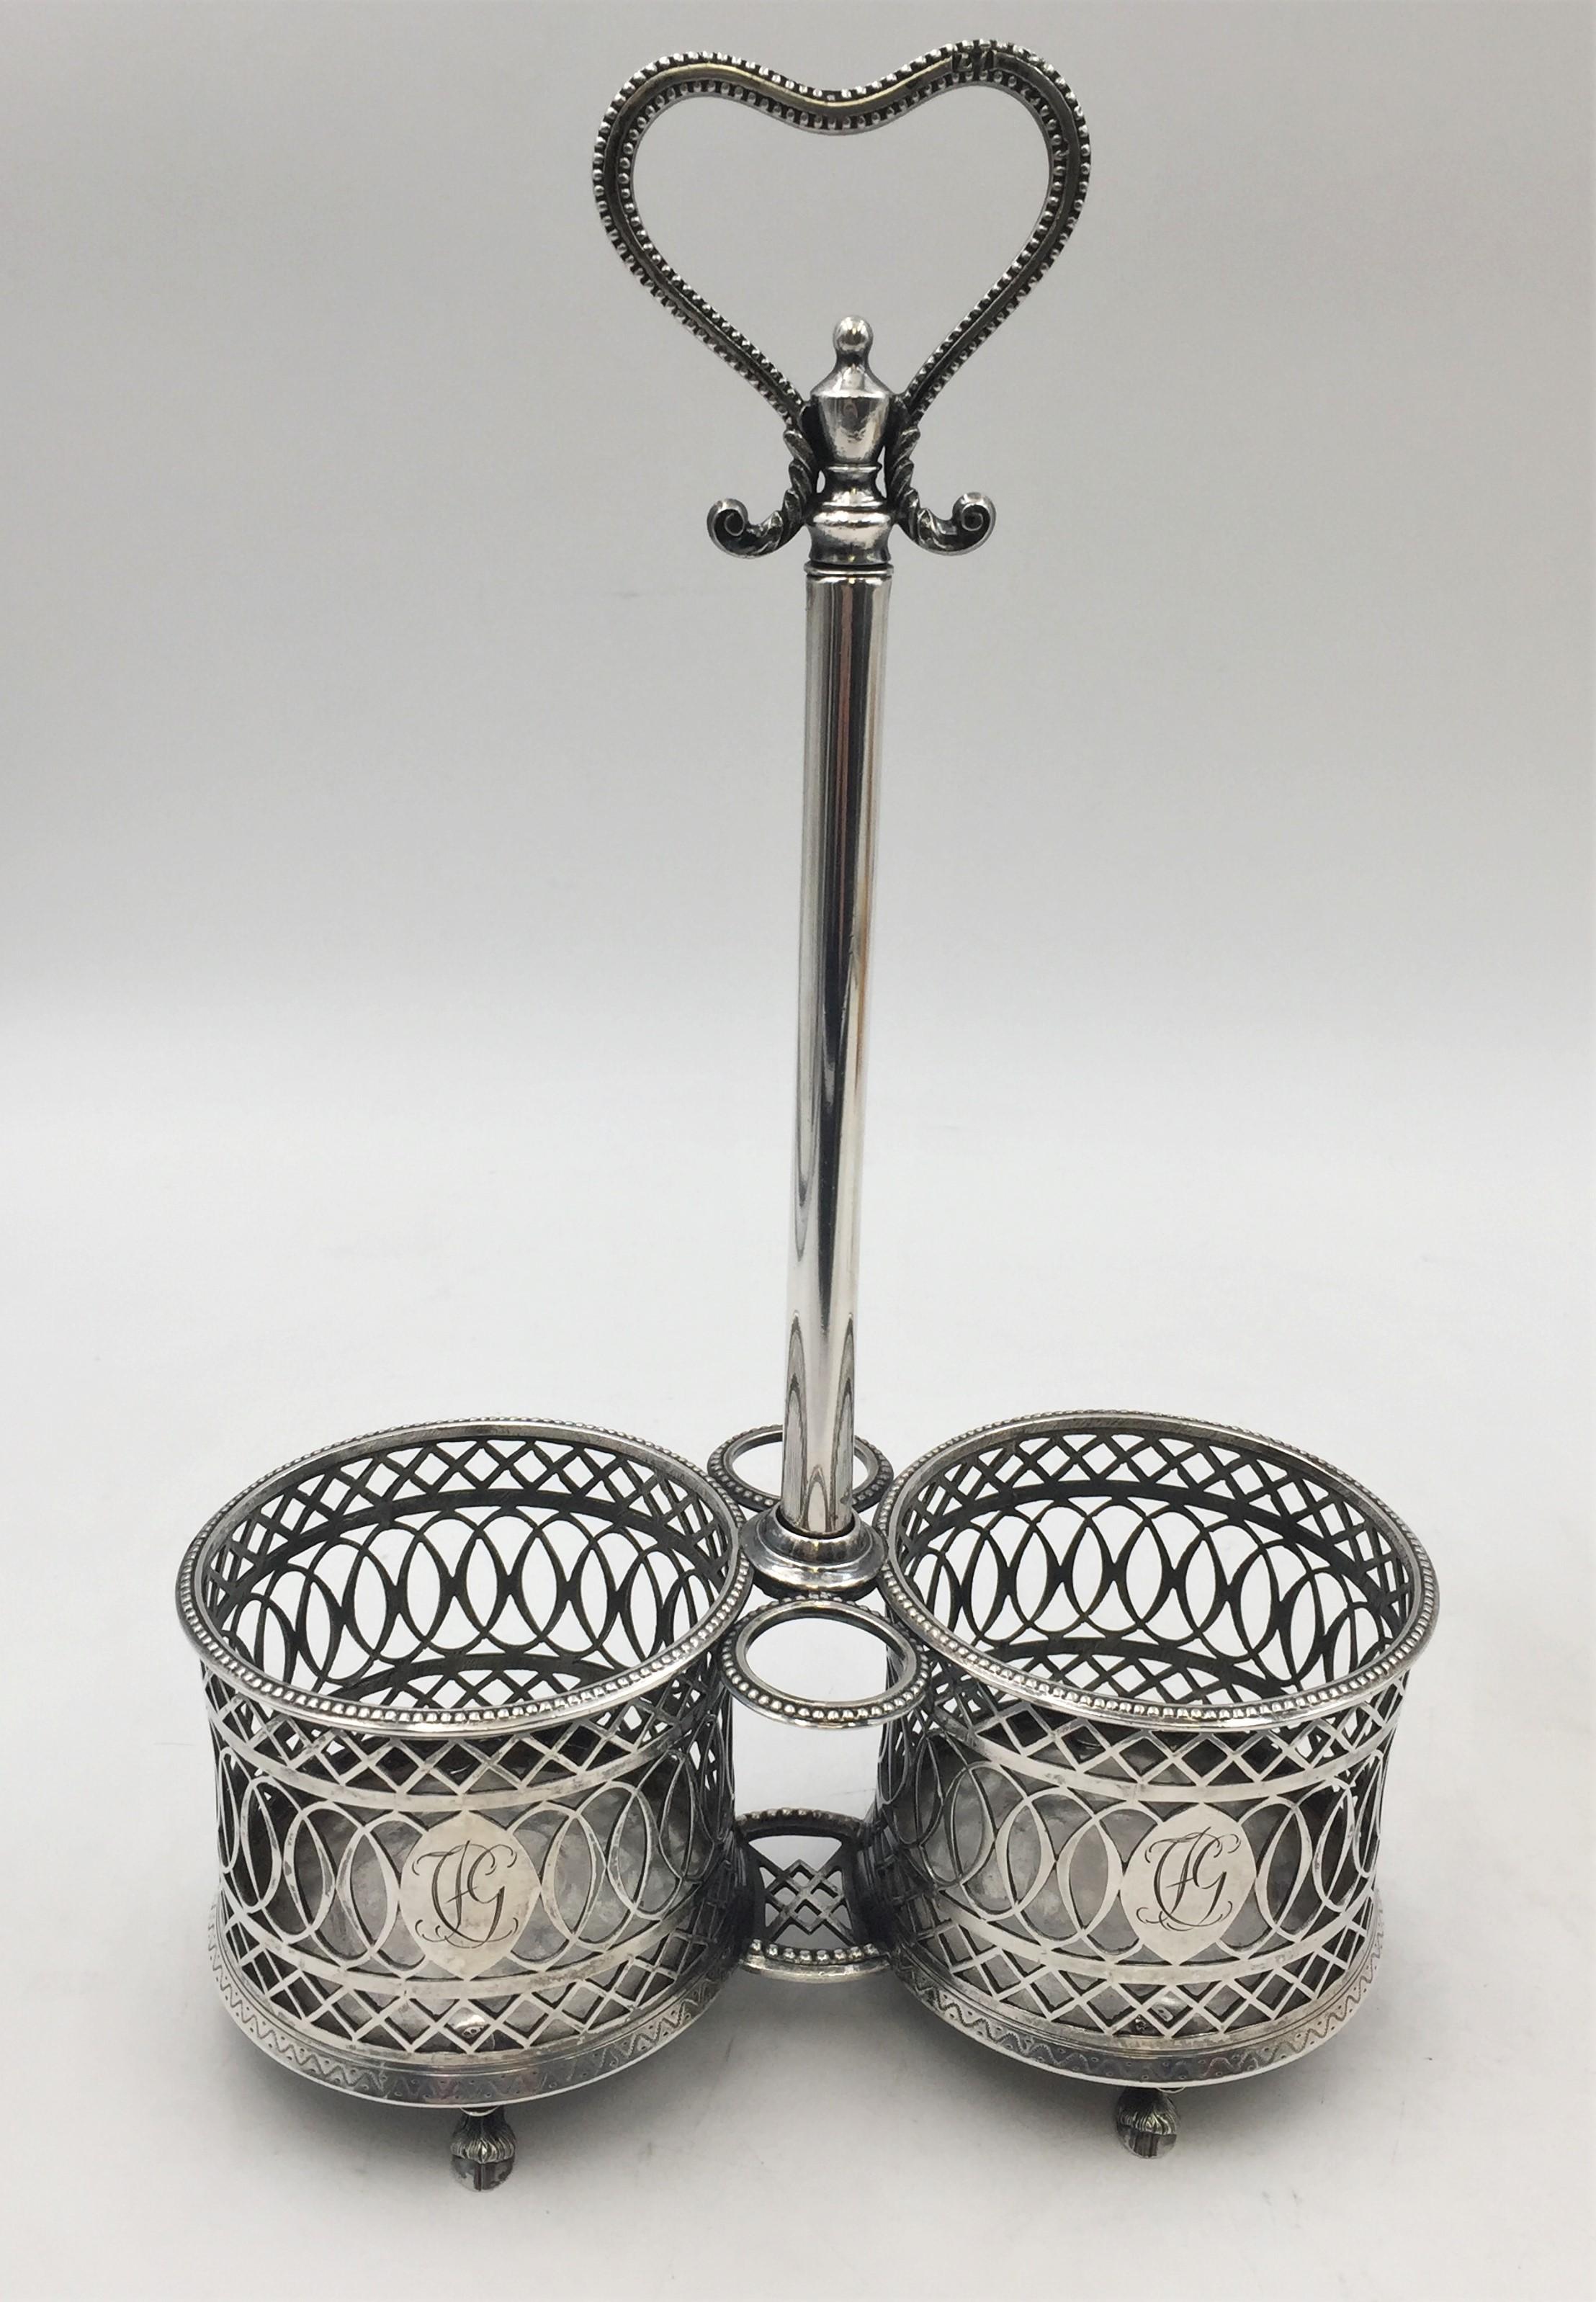 Continental silver cruet, most likely German and from the 18th century, with exquisite pierced work and cartouches with engraved monograms, standing on 4 animal-shaped feet, with 2 glass bottles with stoppers. The holder measures 11 1/2'' in height